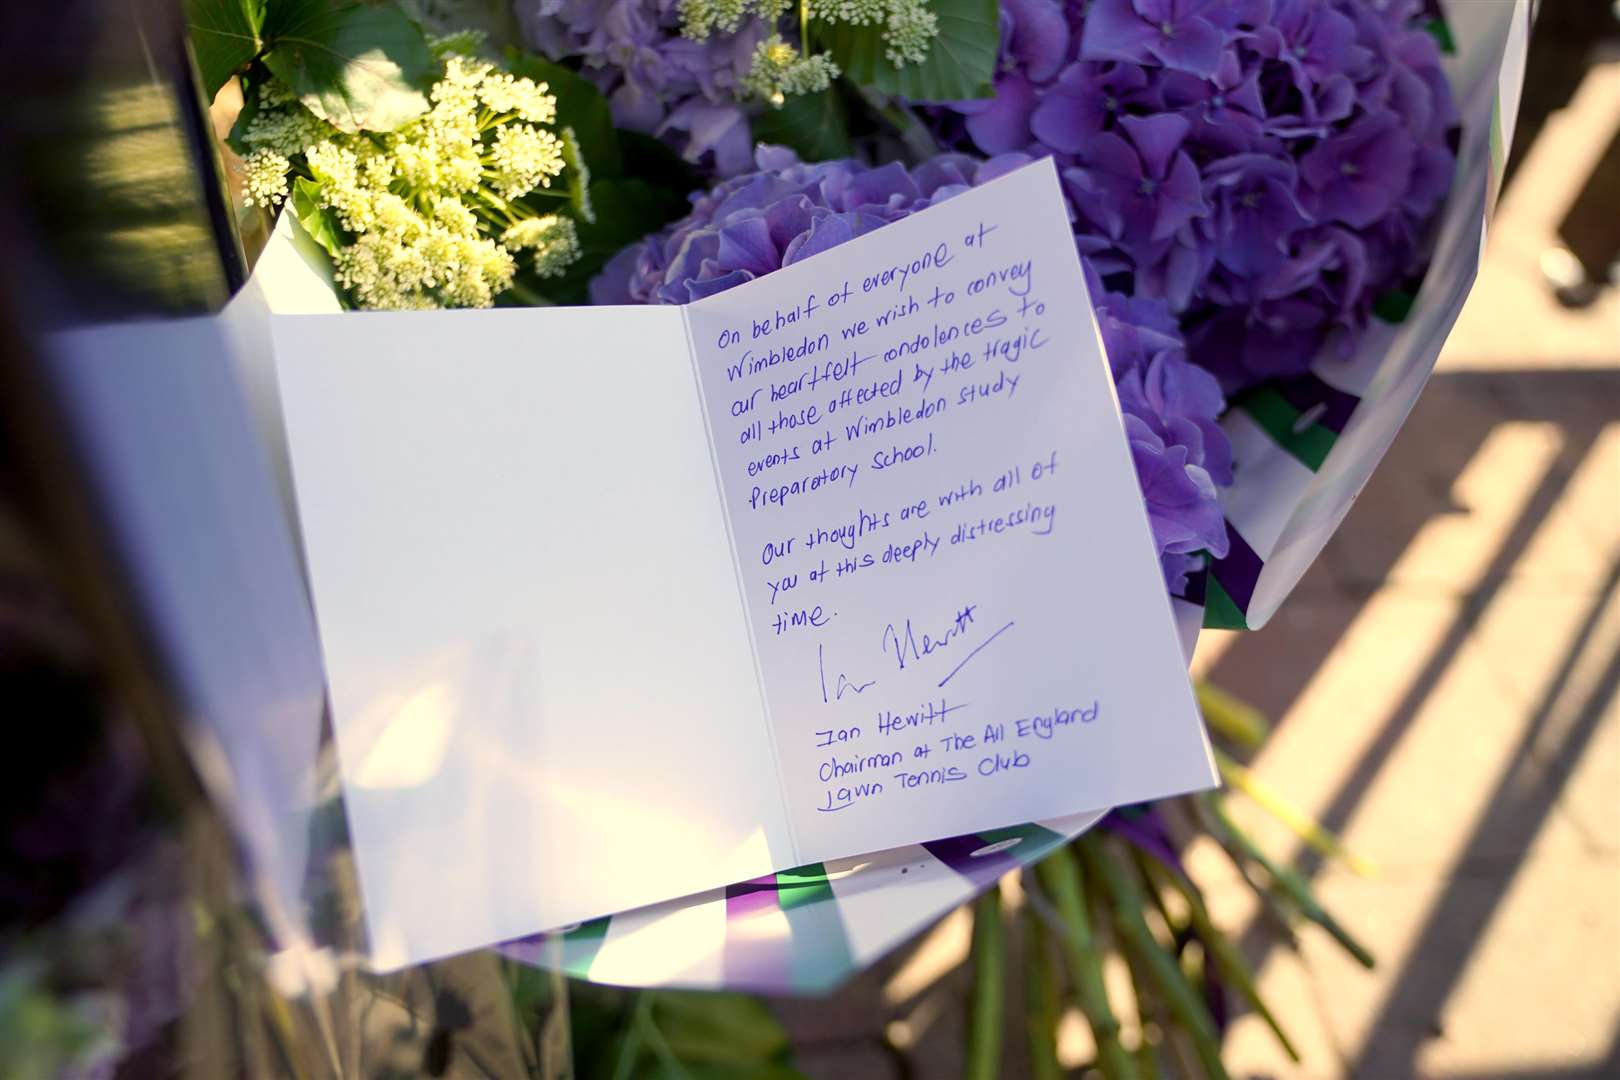 Flowers were left by Ian Hewitt, chairman of the All England Lawn Tennis club (Yui Mok/PA)